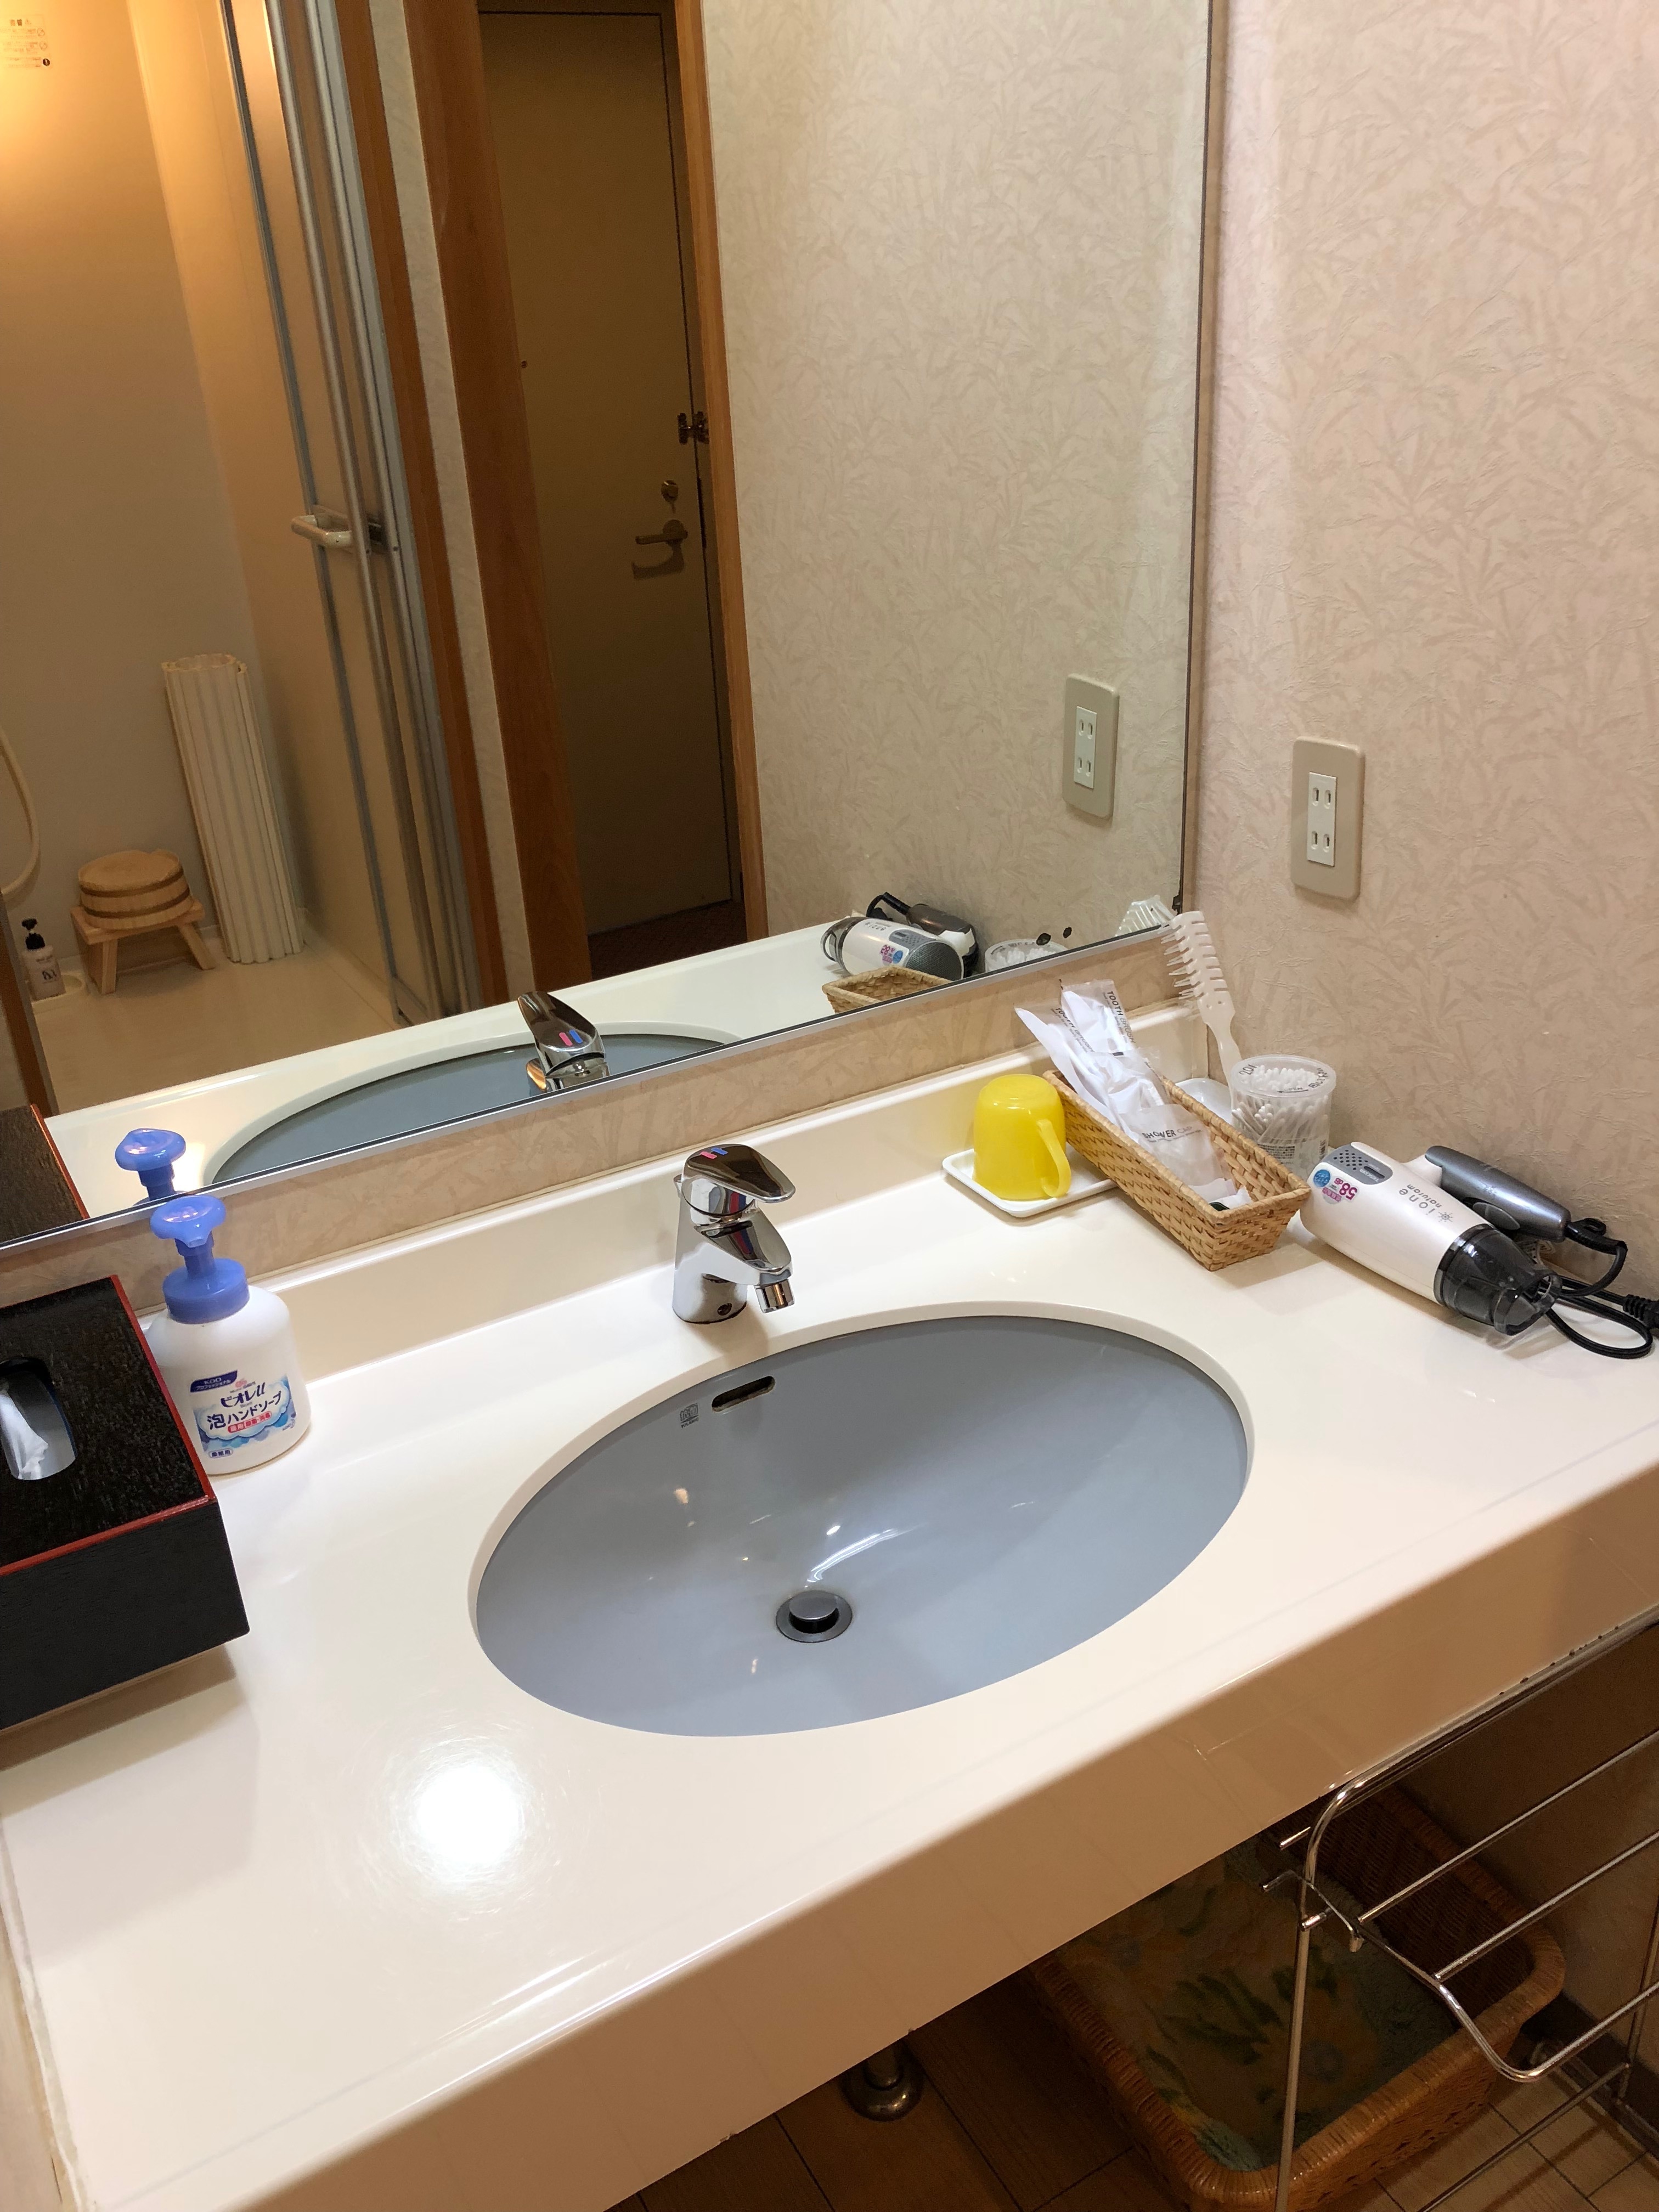 It is a guest room washbasin